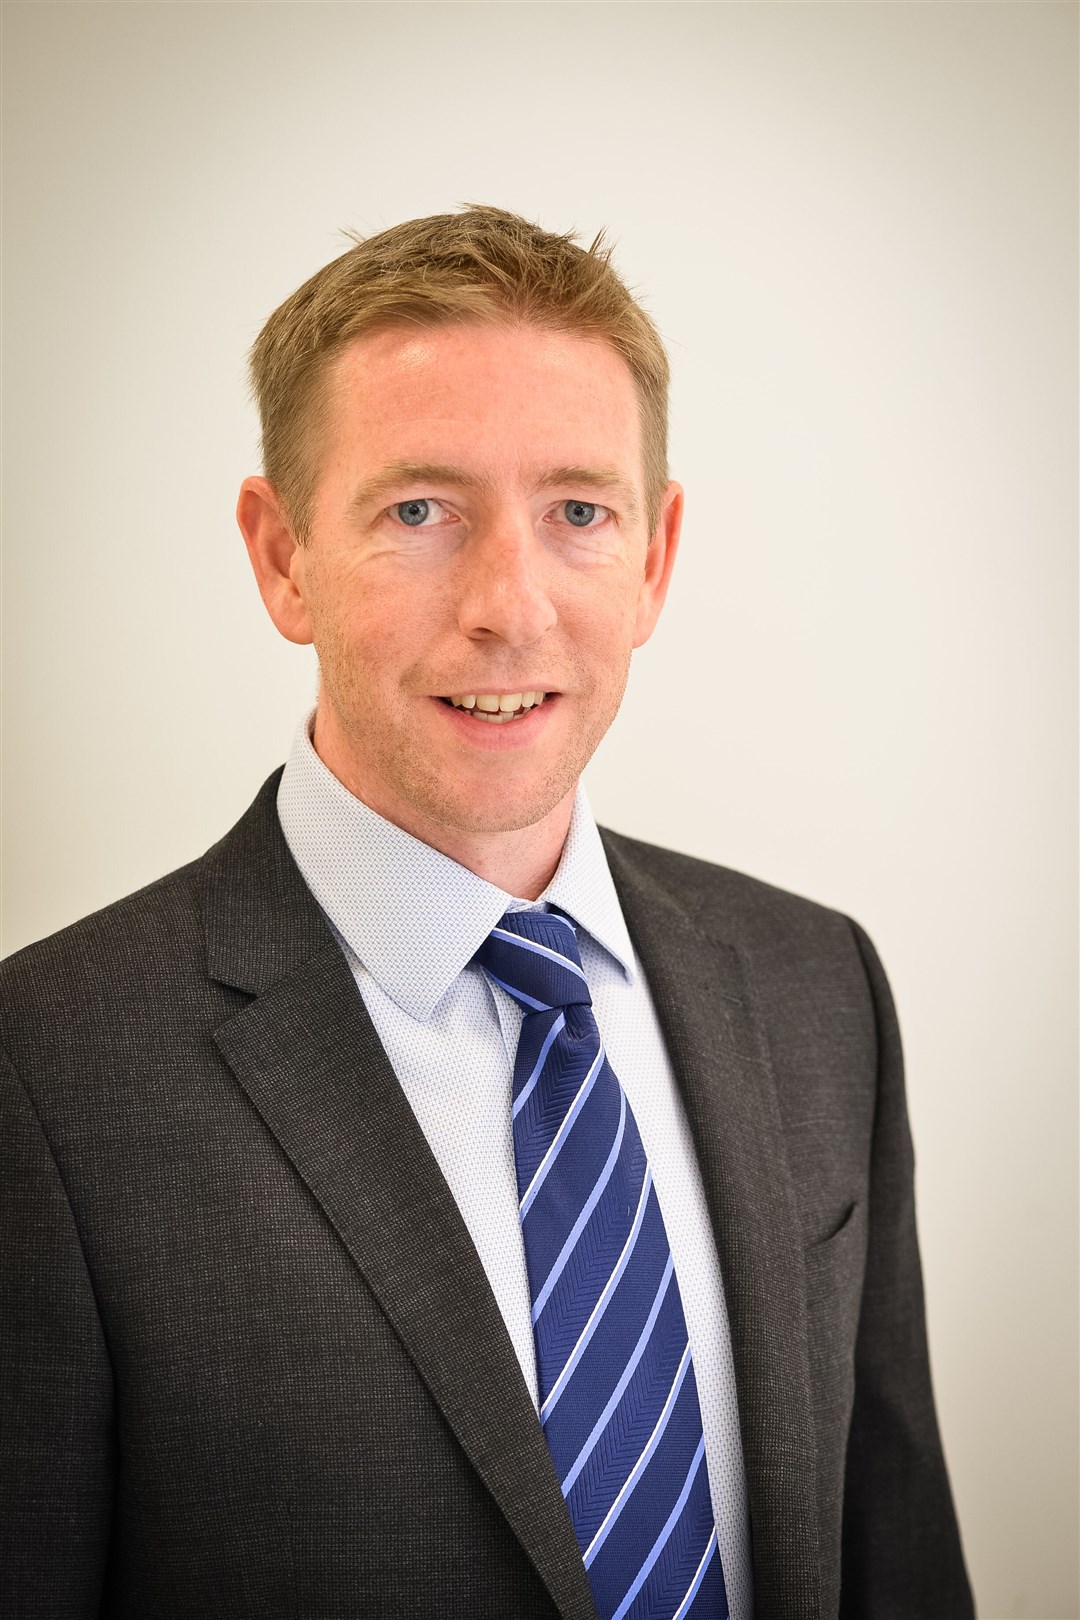 Jim Irvine has joined Getech to oversee its green hydroden hub development programme.